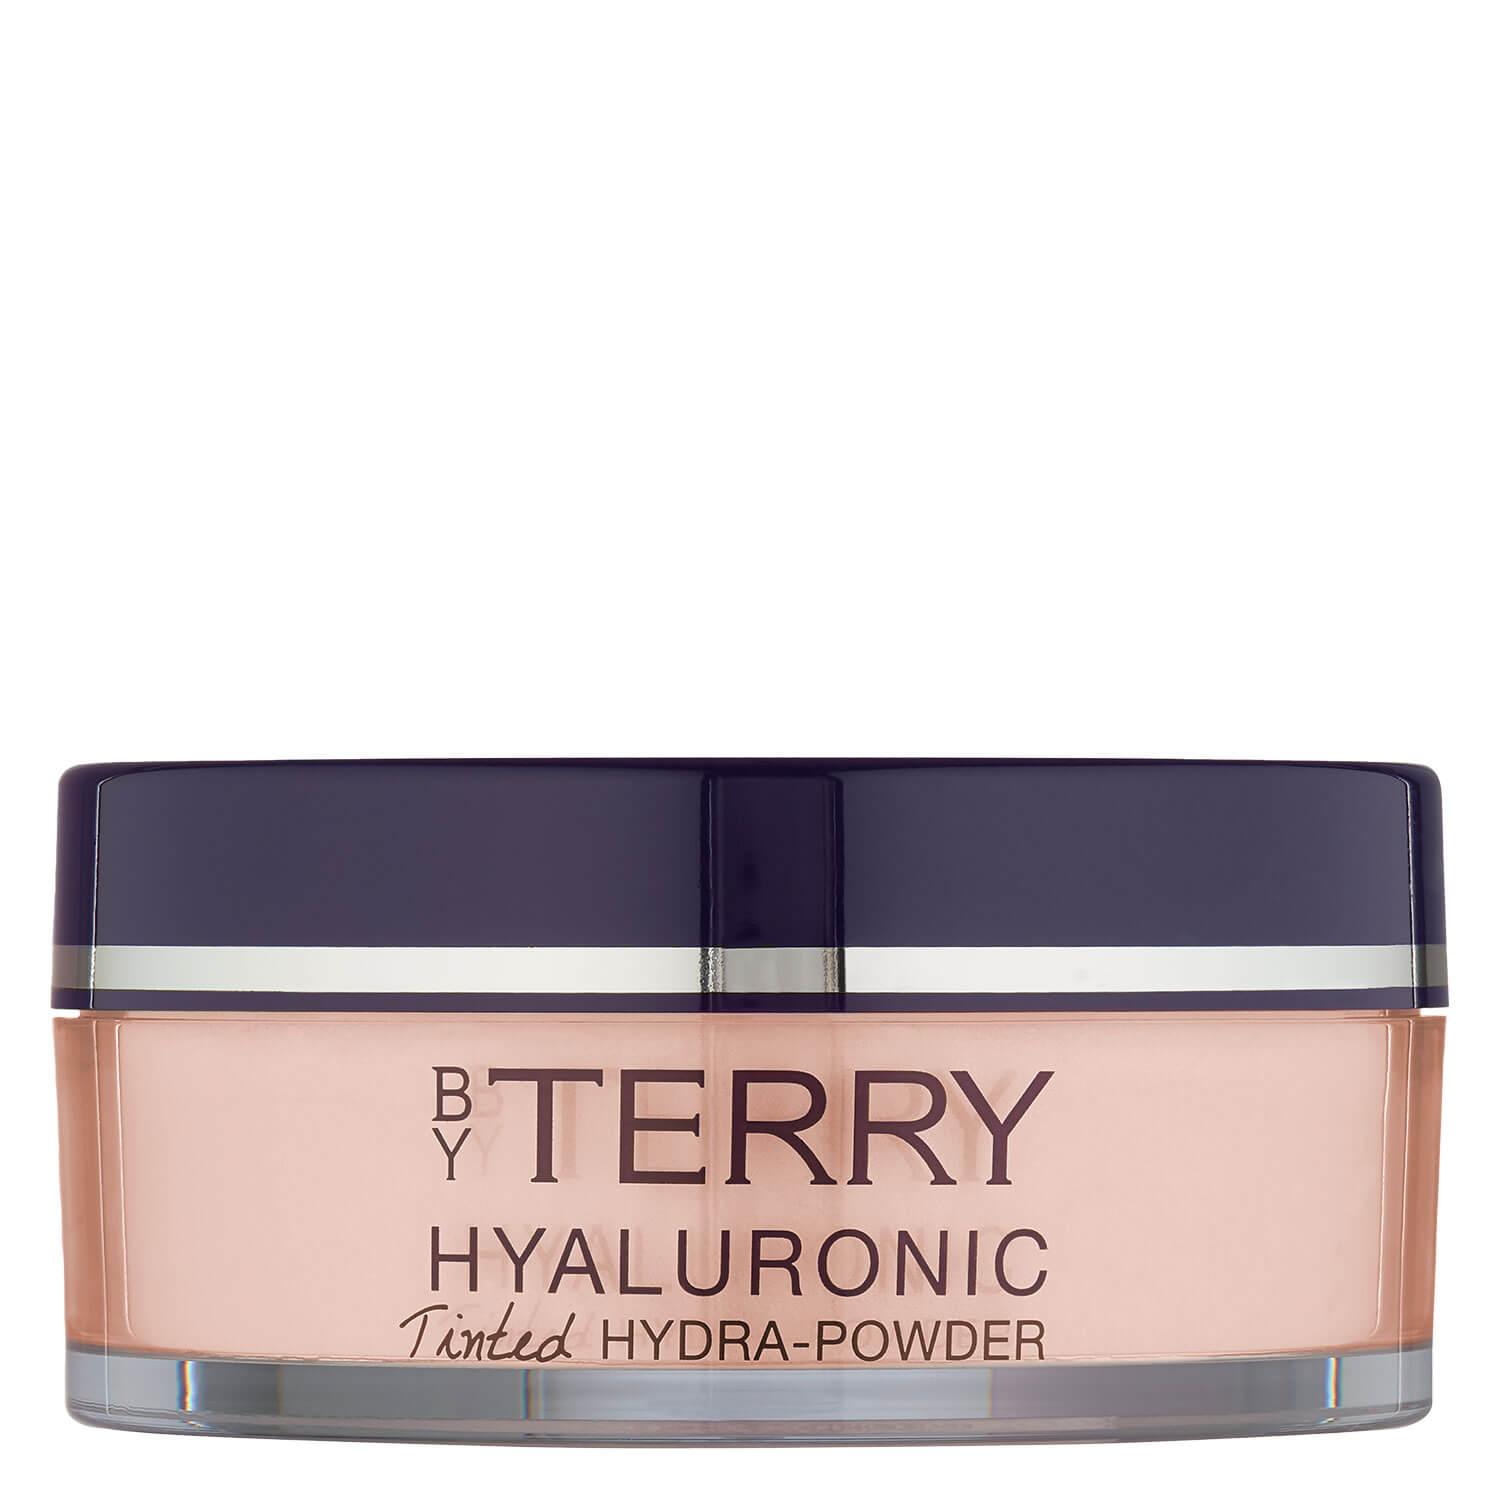 By Terry Powder - Hyaluronic Hydra-Powder Tinted Veil N200. Natural 